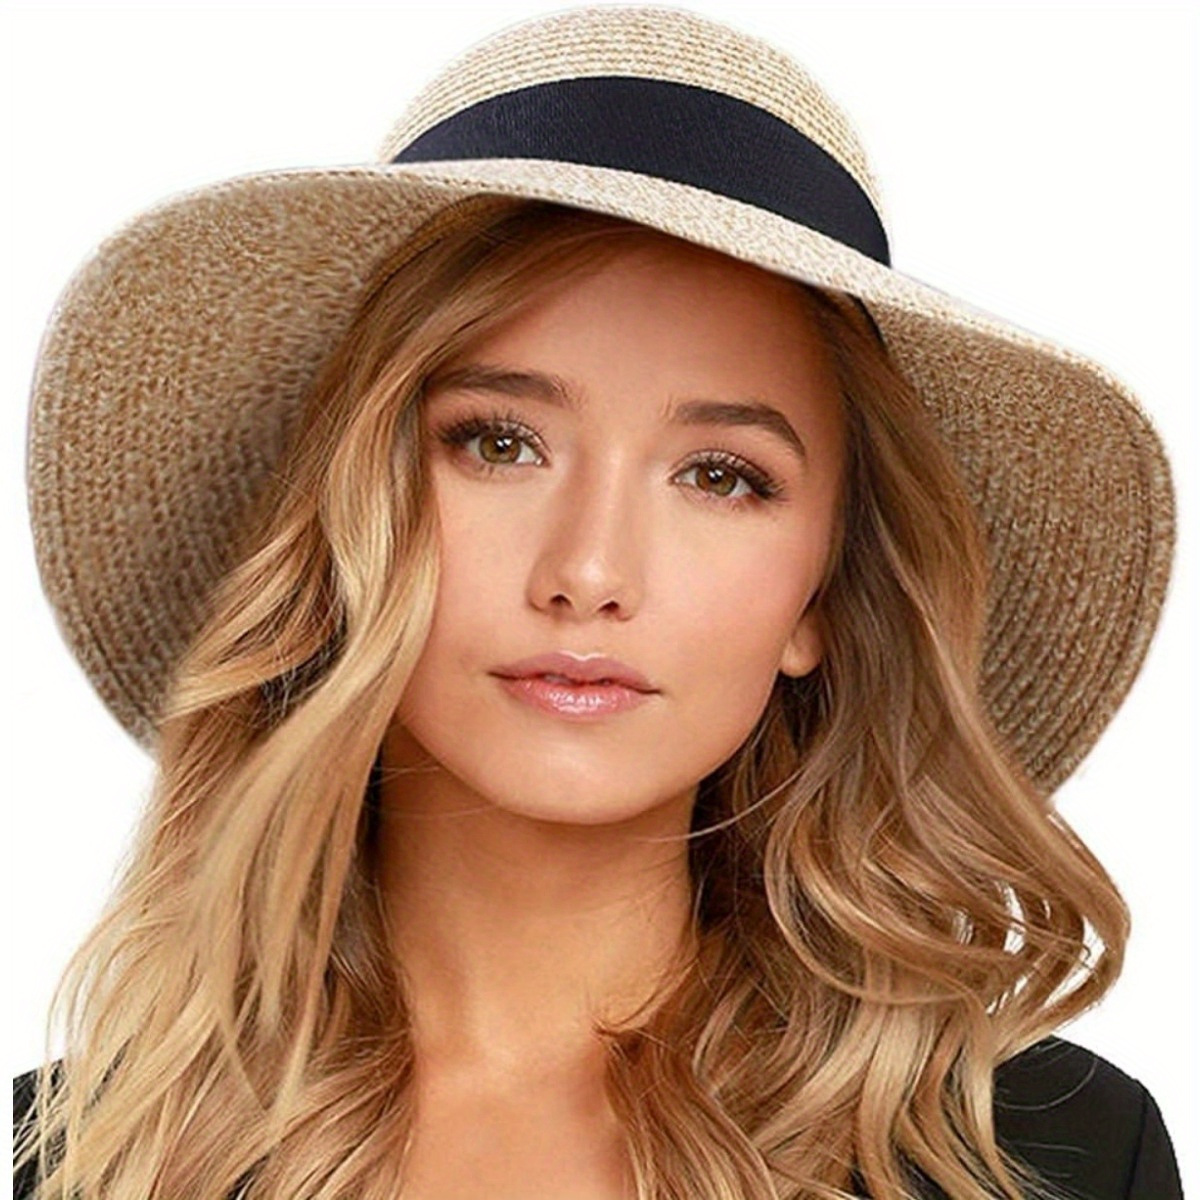 

Bow Decorative Straw Hat Wide Brim Breathable Sun Hat Summer Foldable Beach Hats For Women